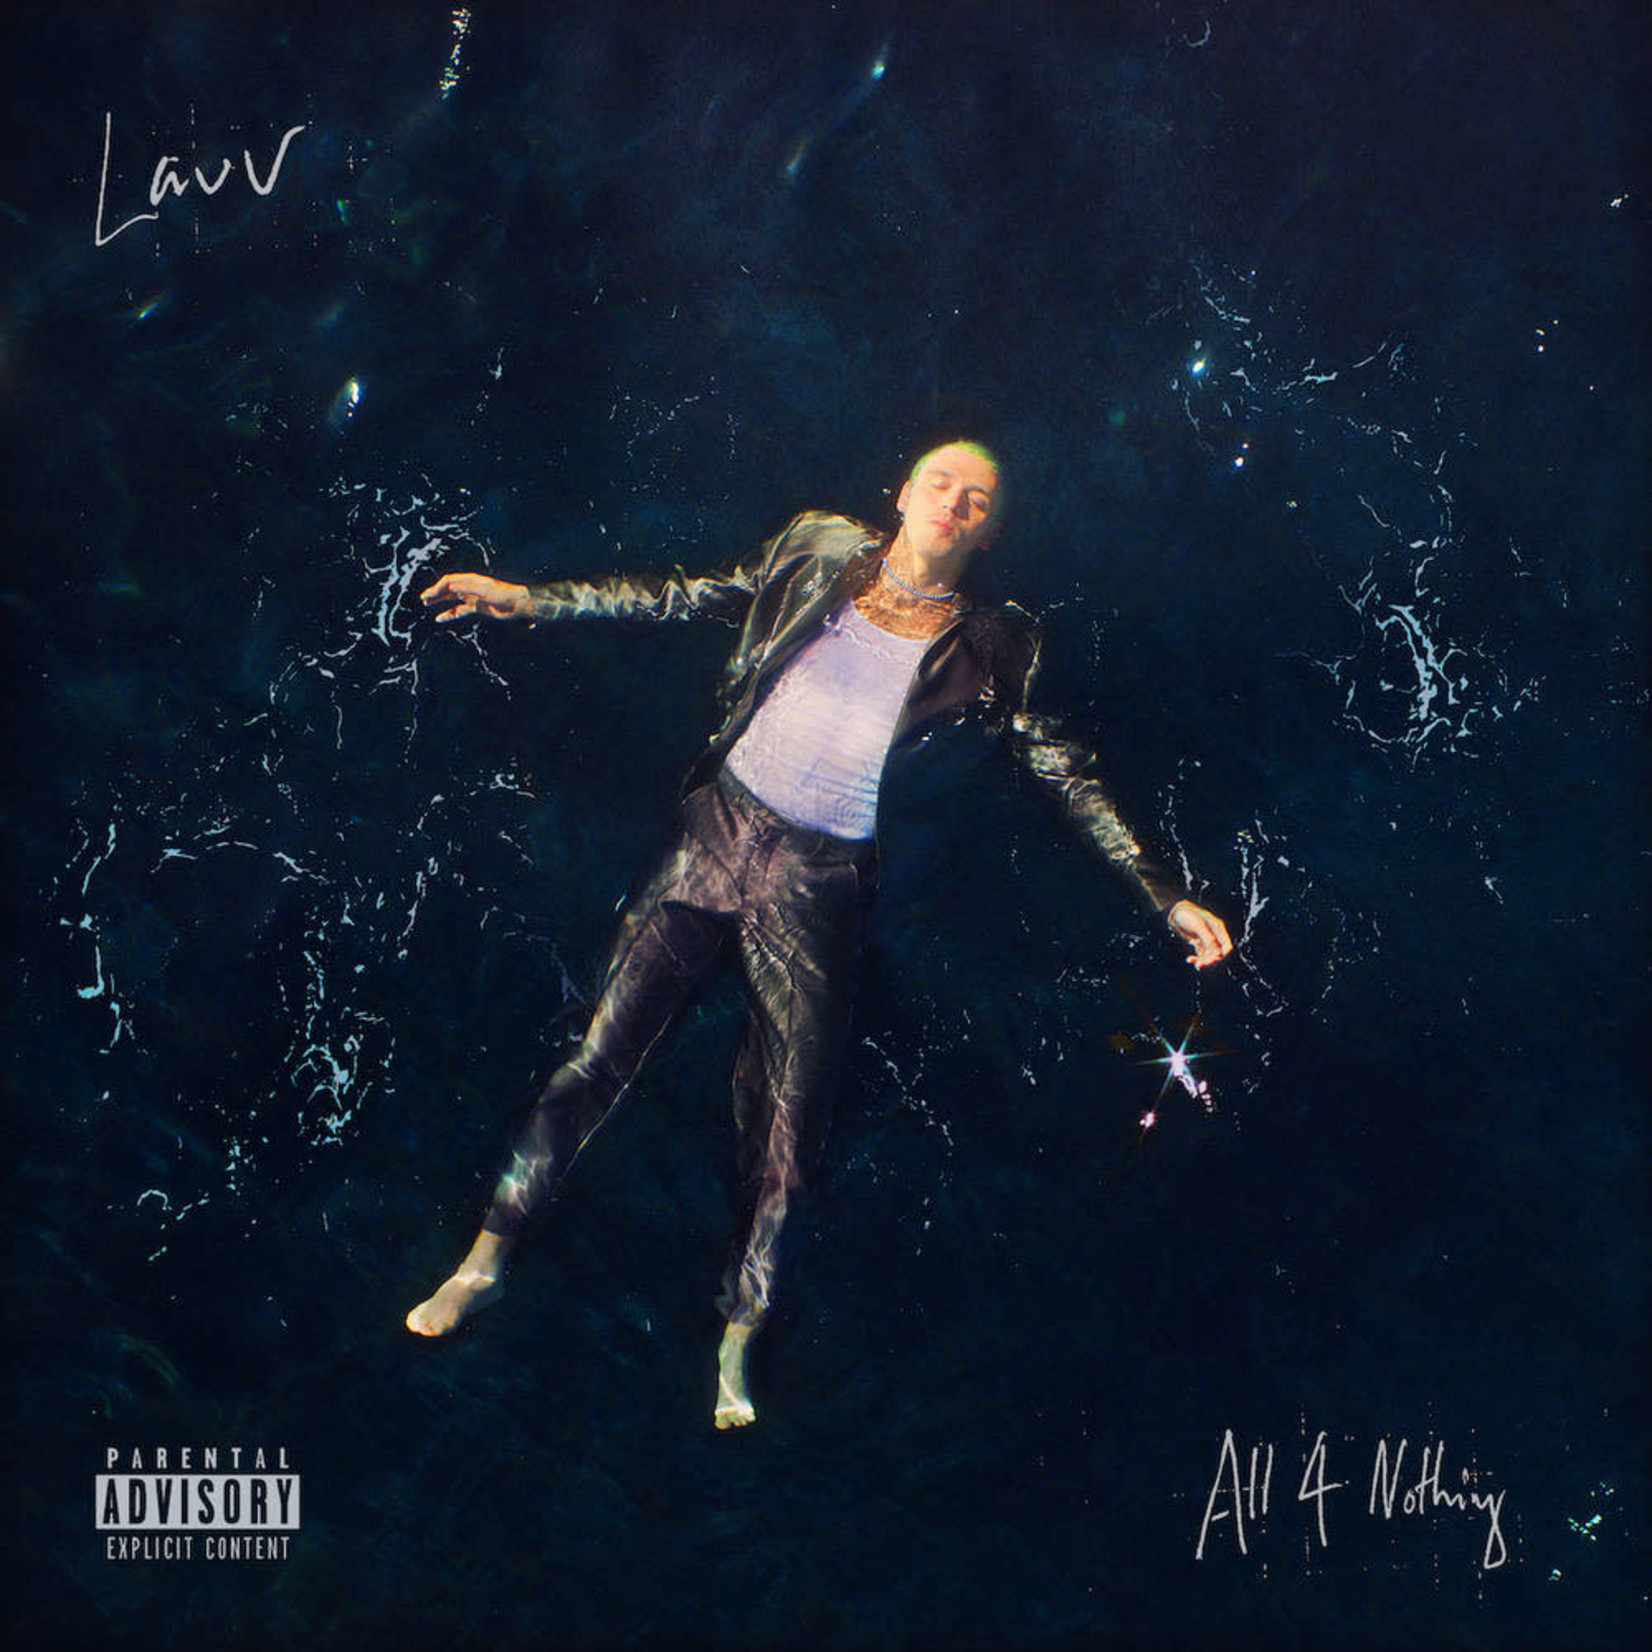 [New] Lauv - All 4 Nothing